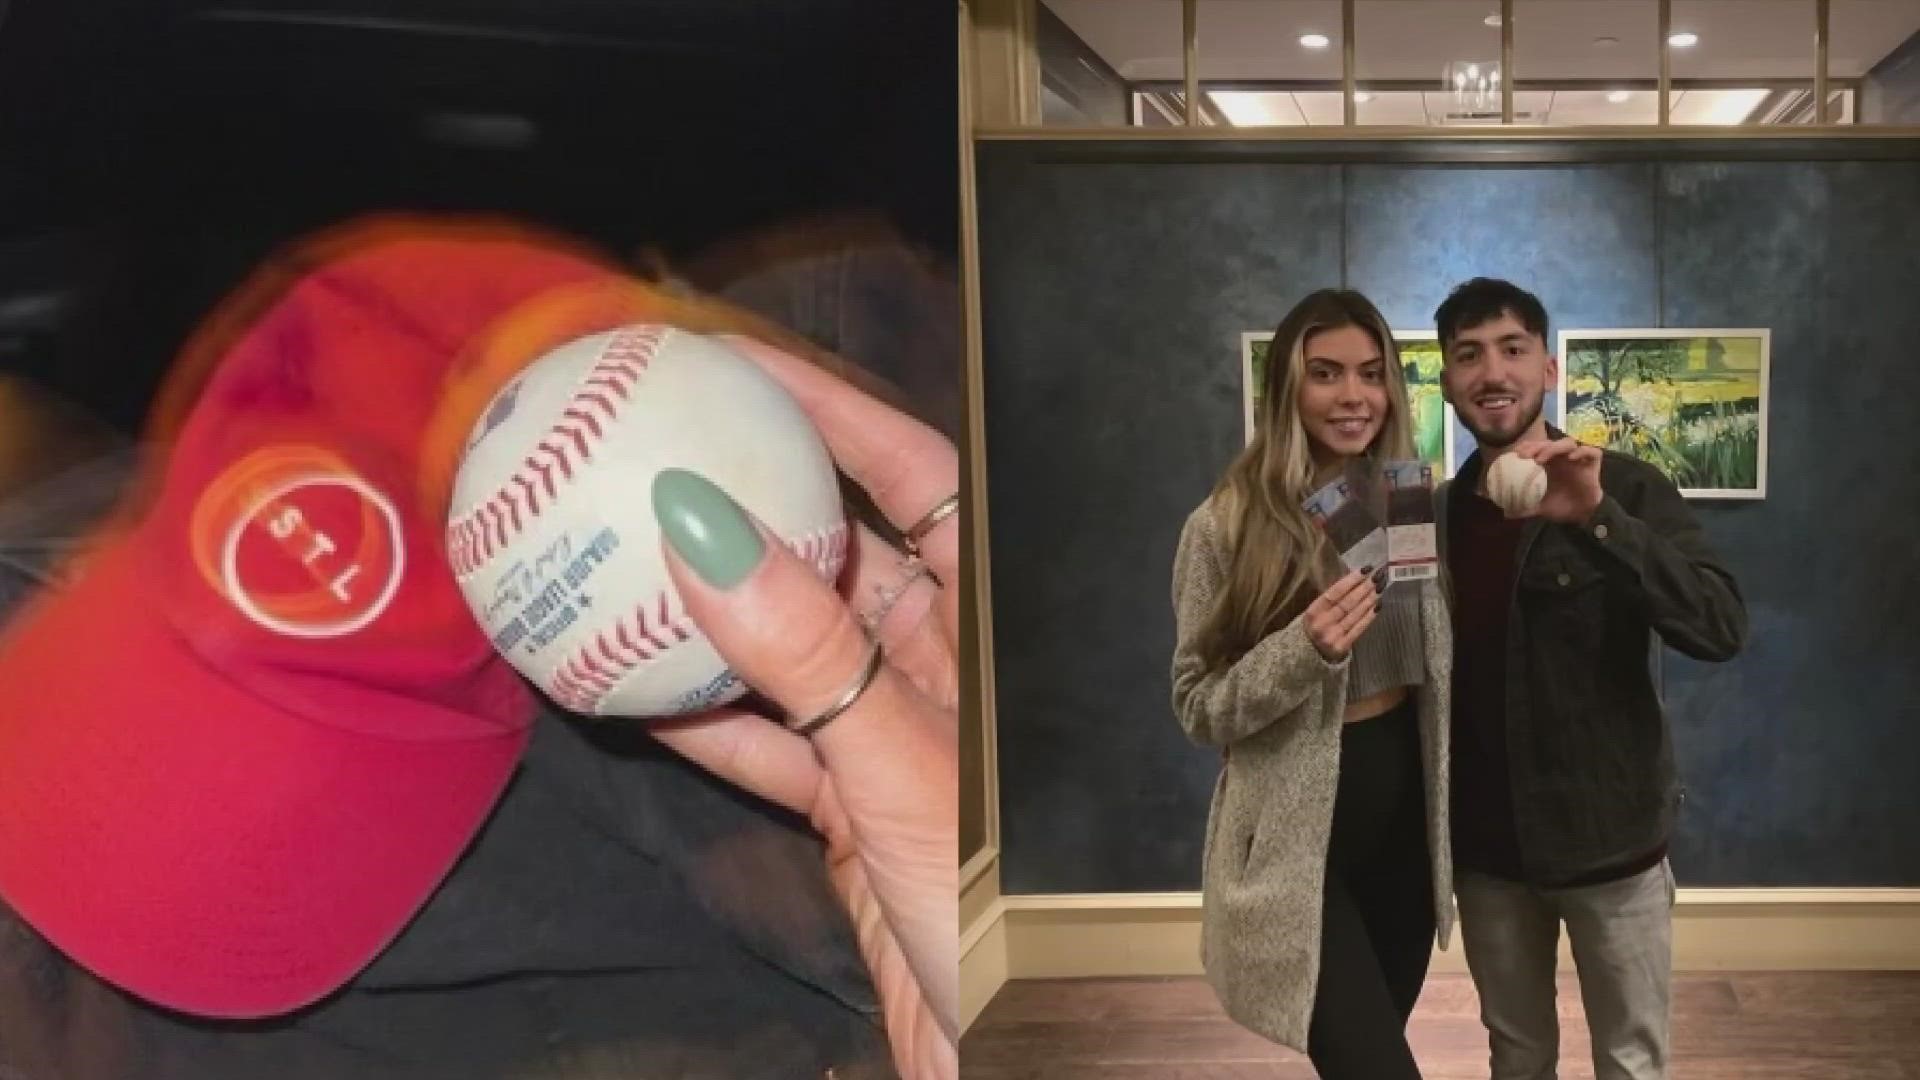 They are a young couple who bought two tickets to a baseball game on Sept. 30. Each ticket cost $75 and they ended up getting their money’s worth.